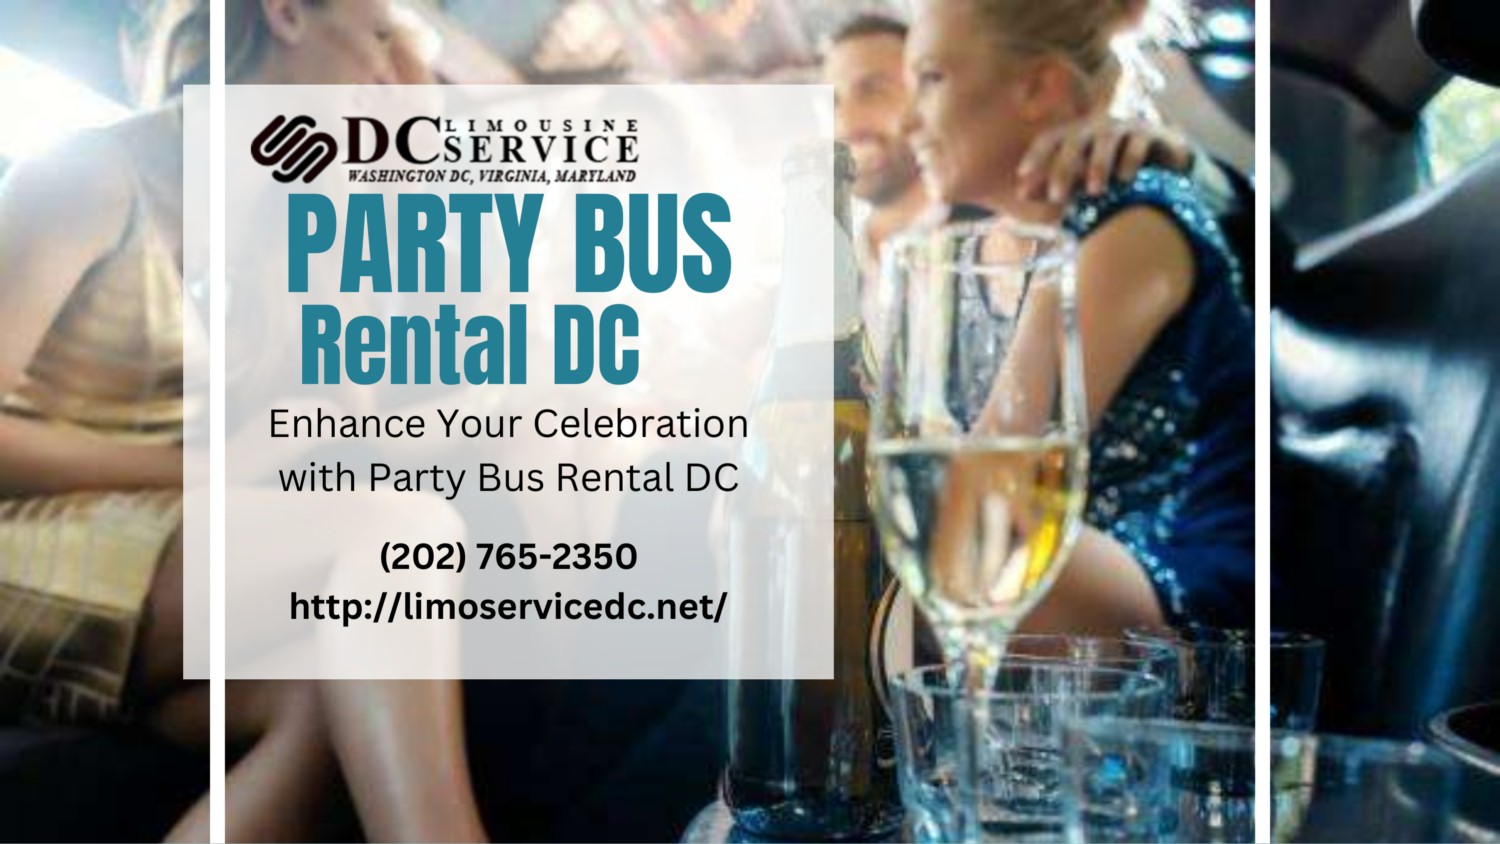 Enhance Your Celebration with Party Bus Rental DC